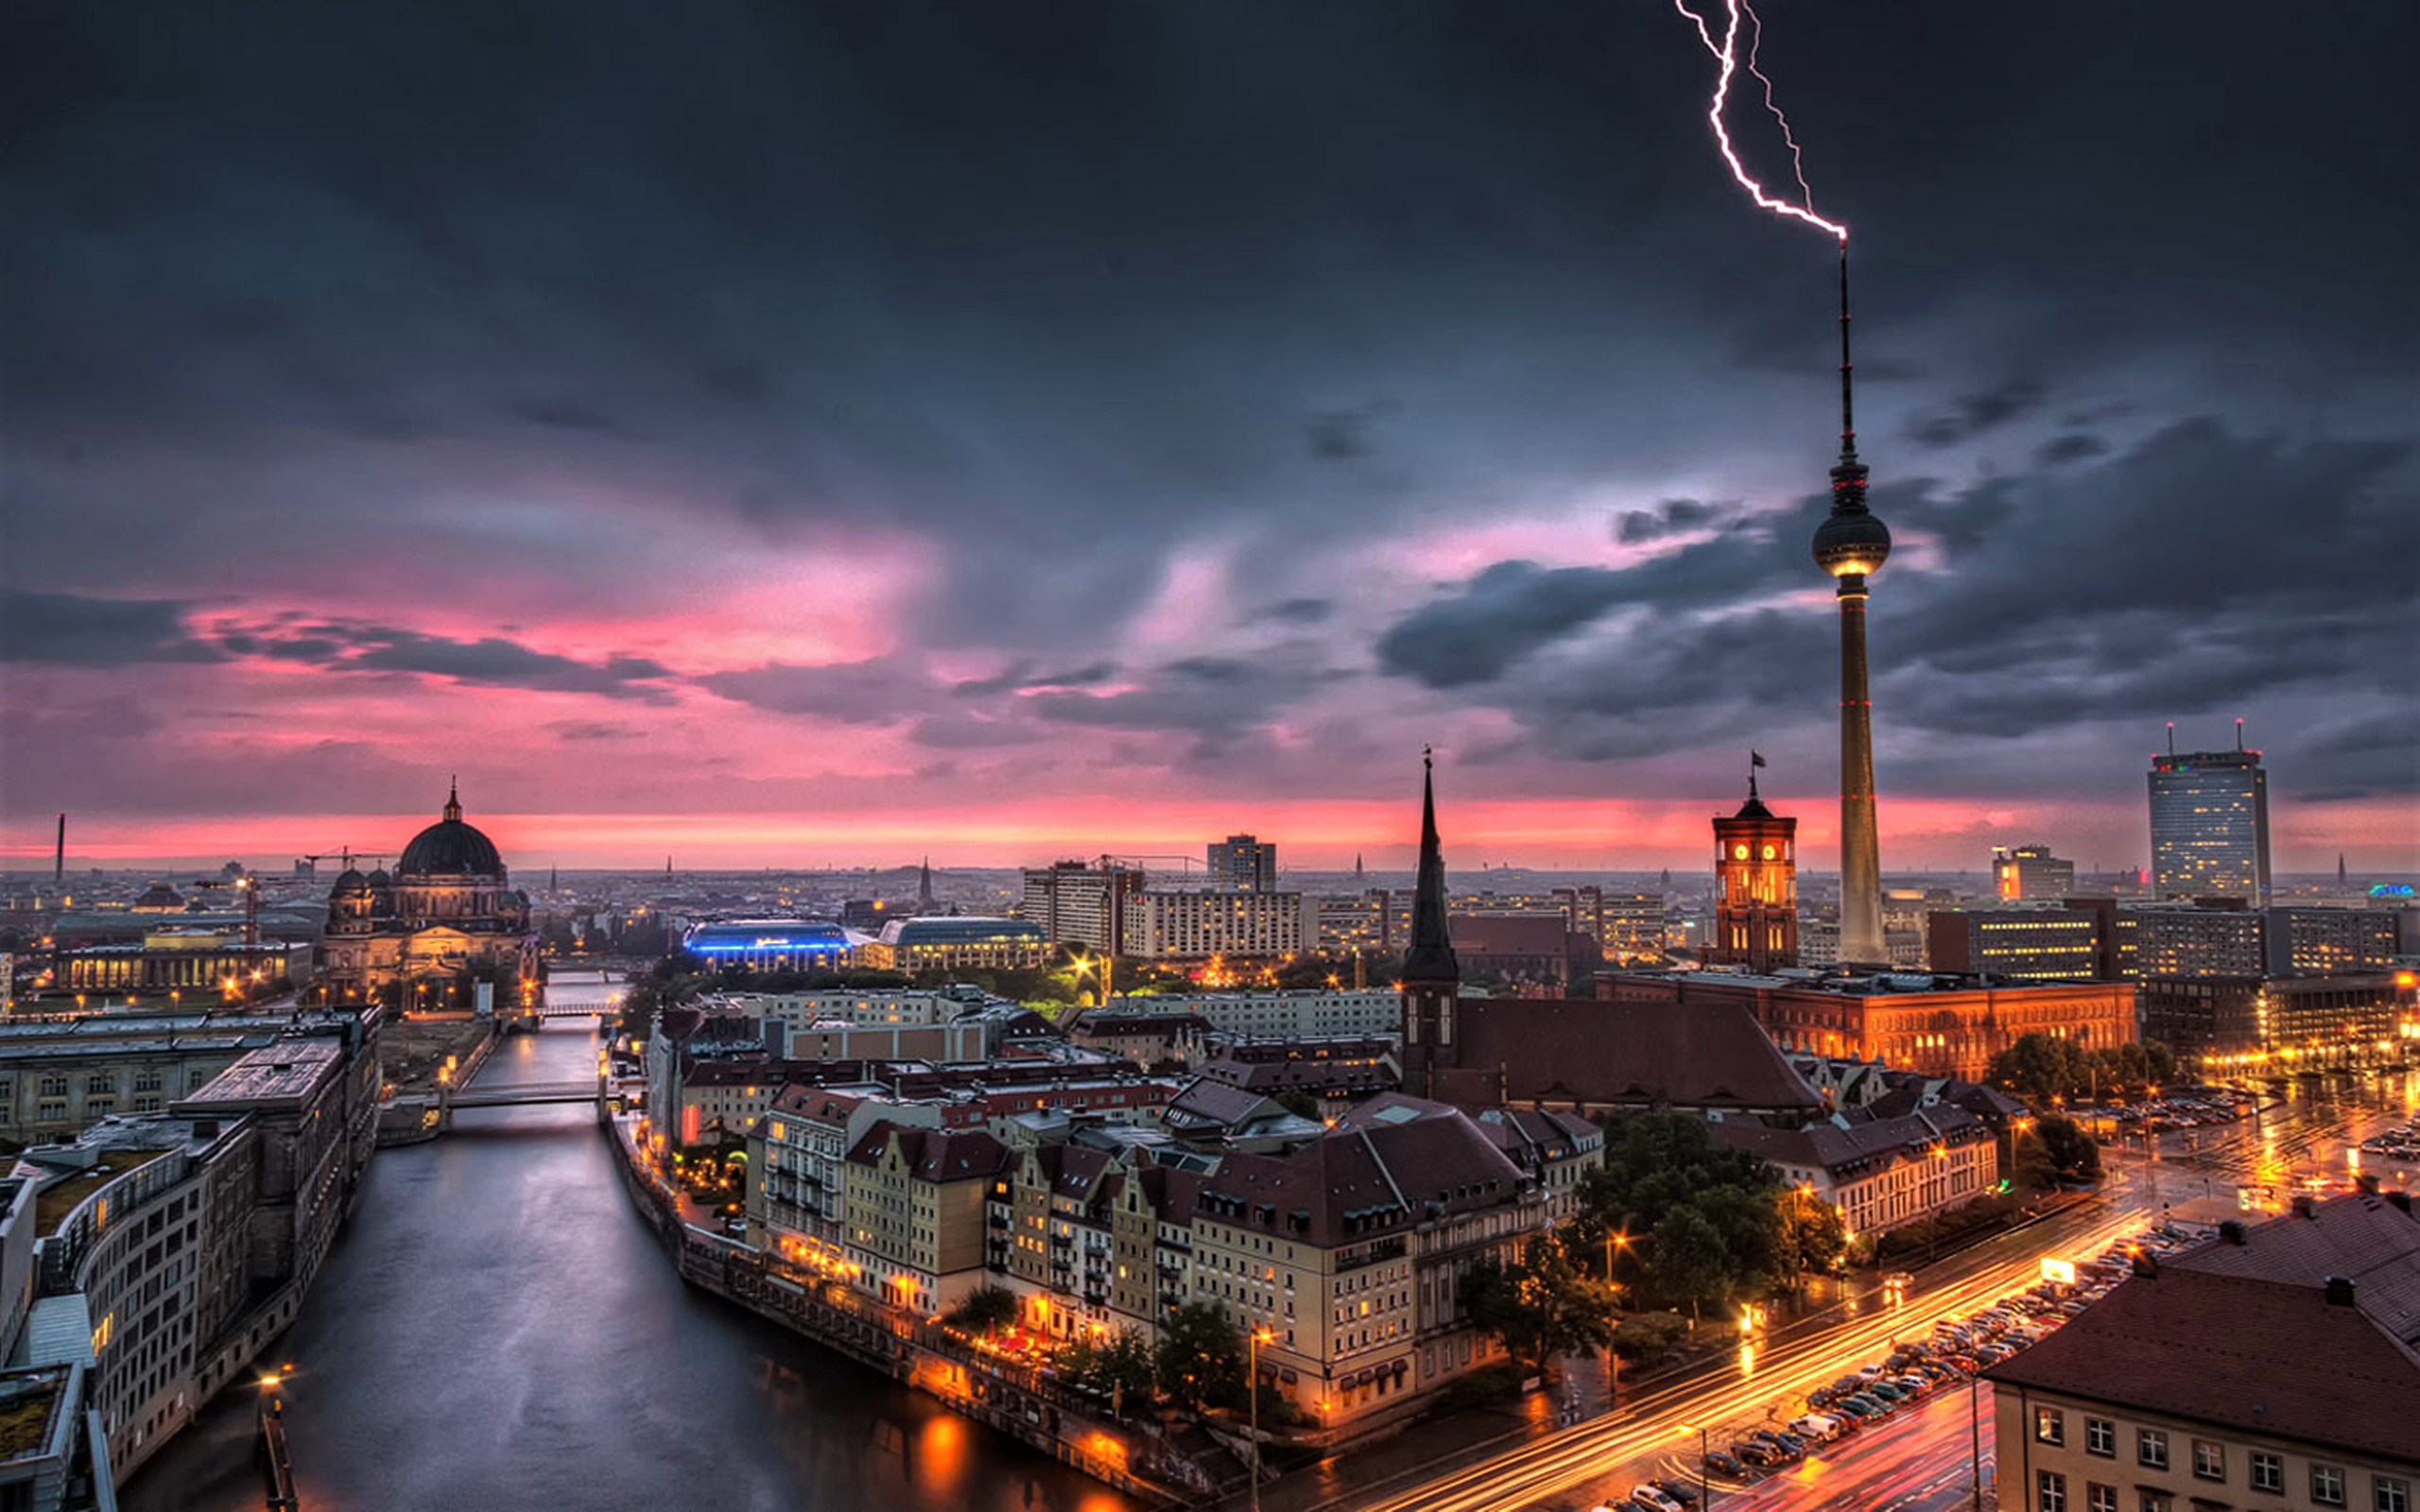 Mobile wallpaper: Berlin, Lightning, Bridge, Cityscape, River, Germany, Man  Made, 1505792 download the picture for free.